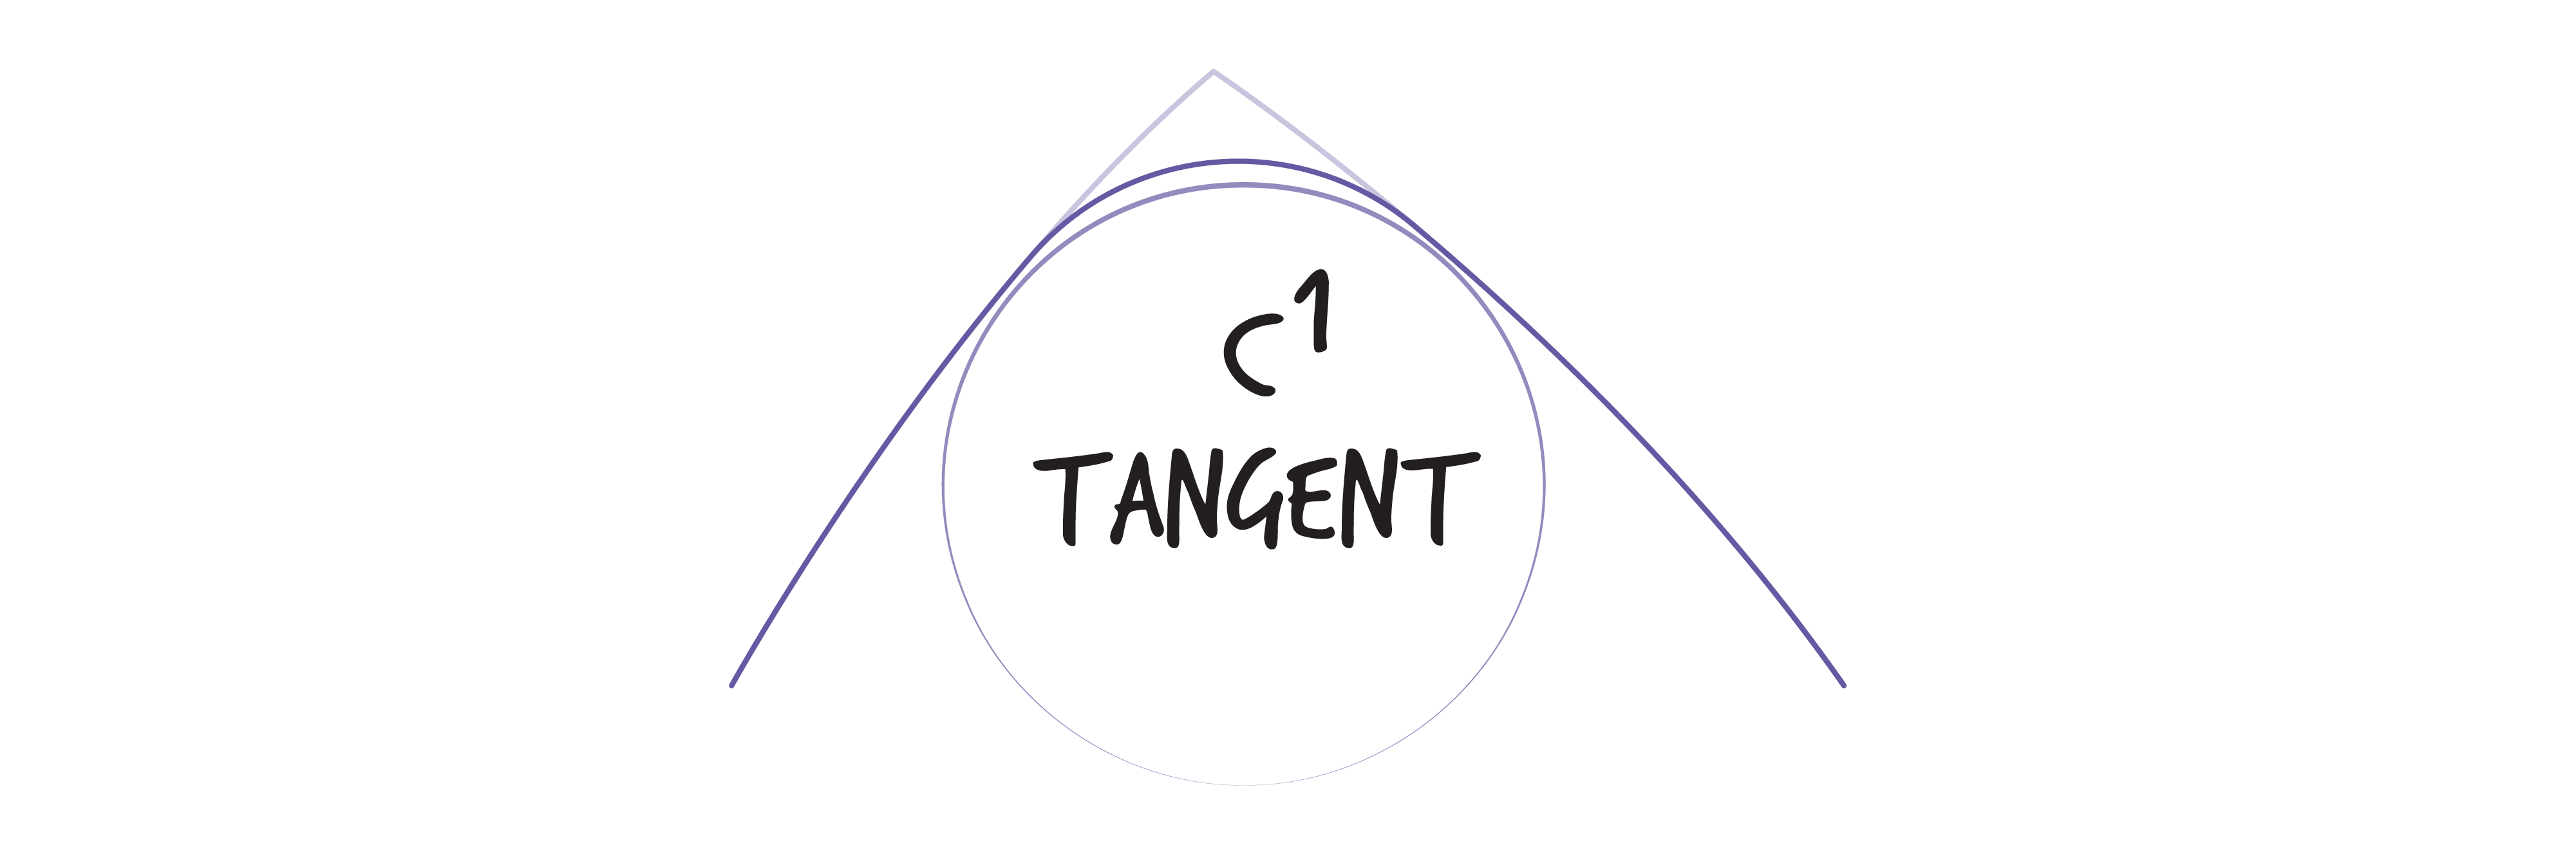 This illustration shows C1 tangent, as shown in the text of the image. The line where the horizontal line meets the vertical line is tangental to each surface.